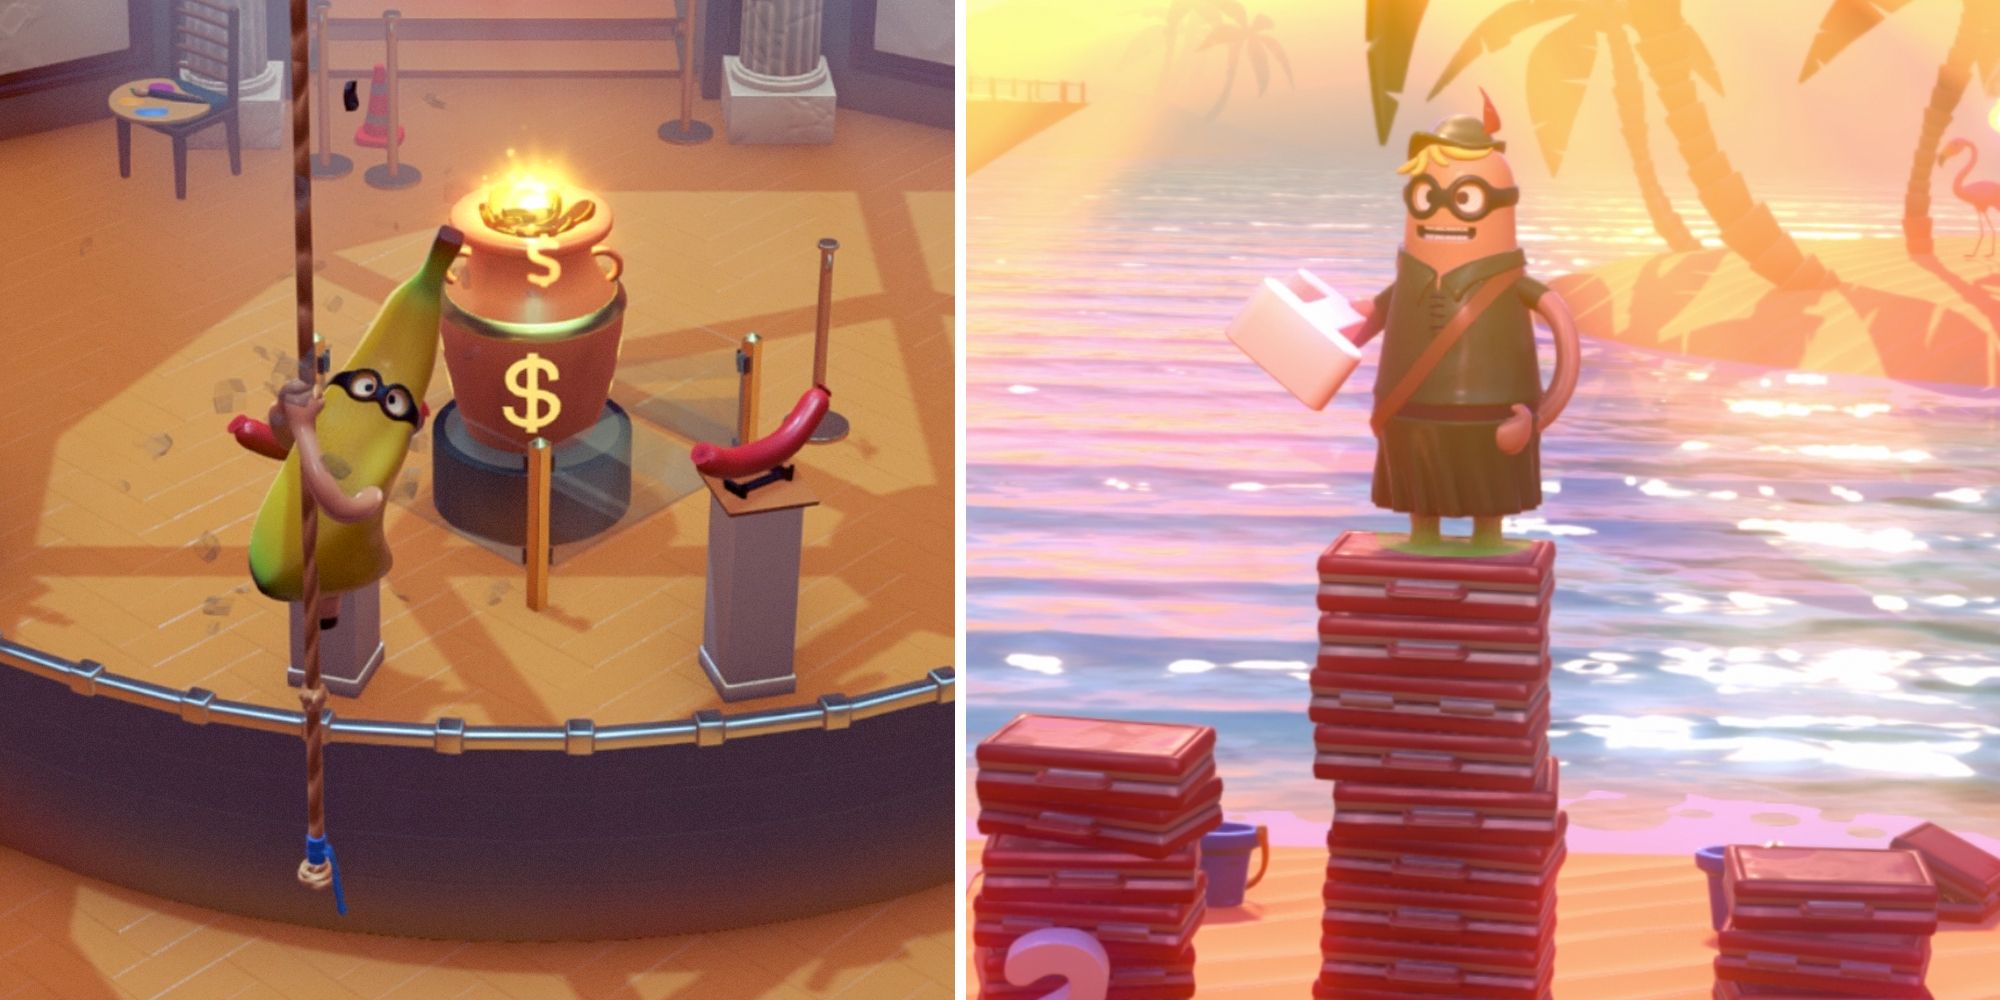 rubber bandits split image. banana on a rope to the left, character winning screen on right